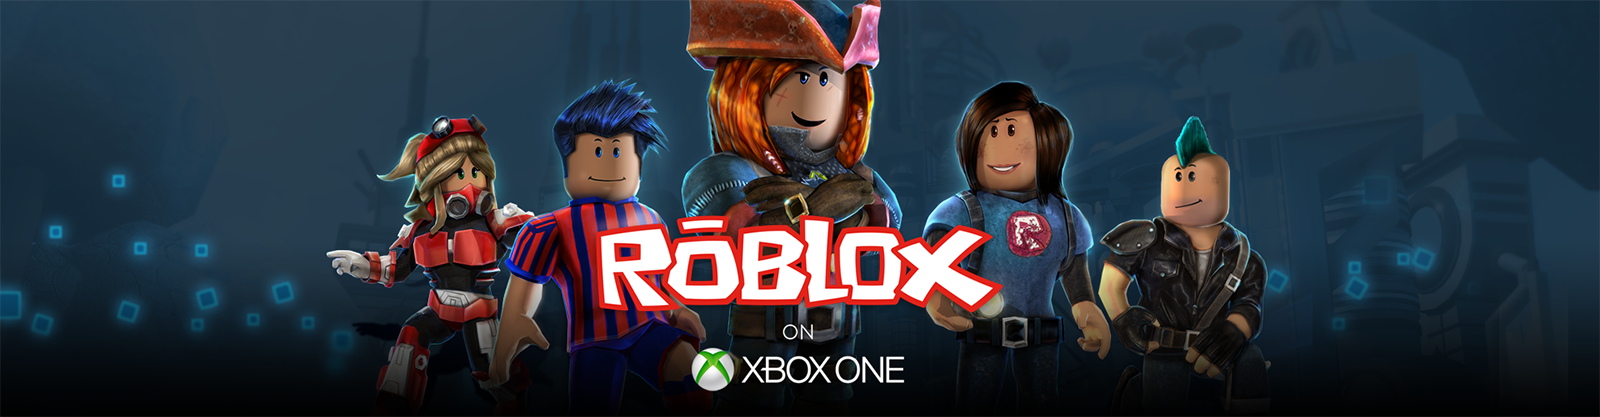 An Update On Roblox On Xbox One Roblox Blog